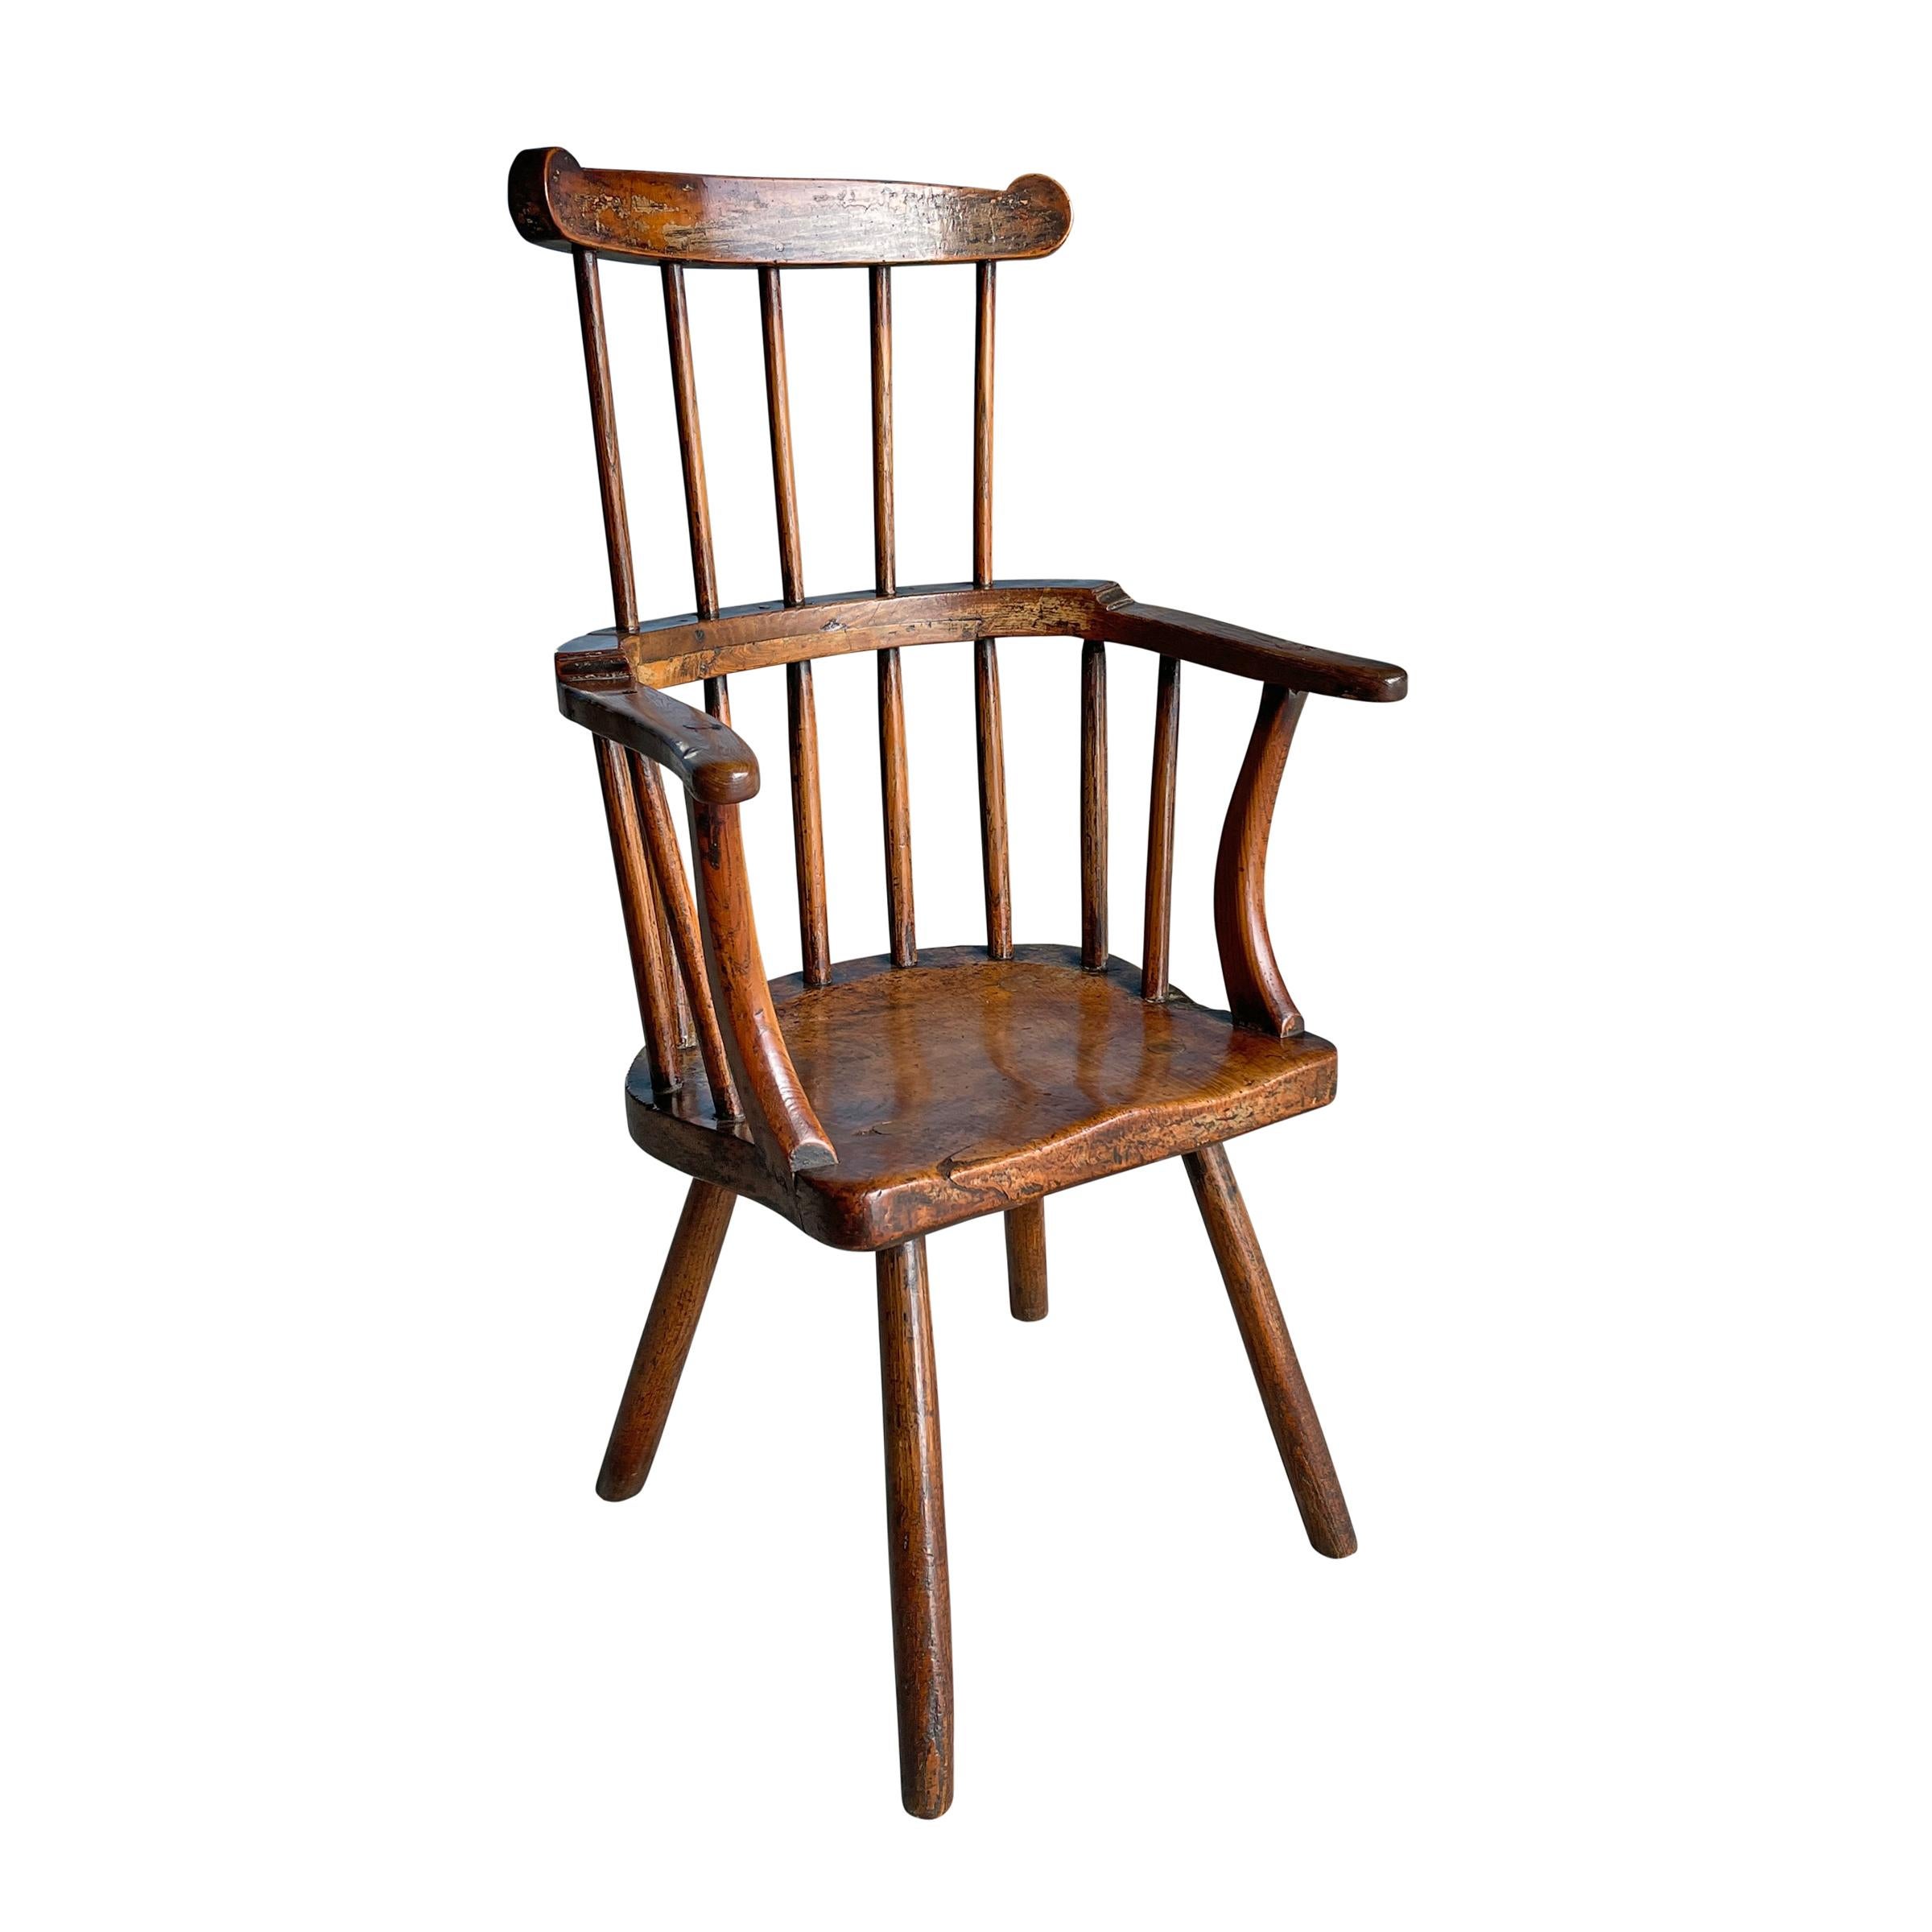 Rustic 18th Century Welsh Stick Chair